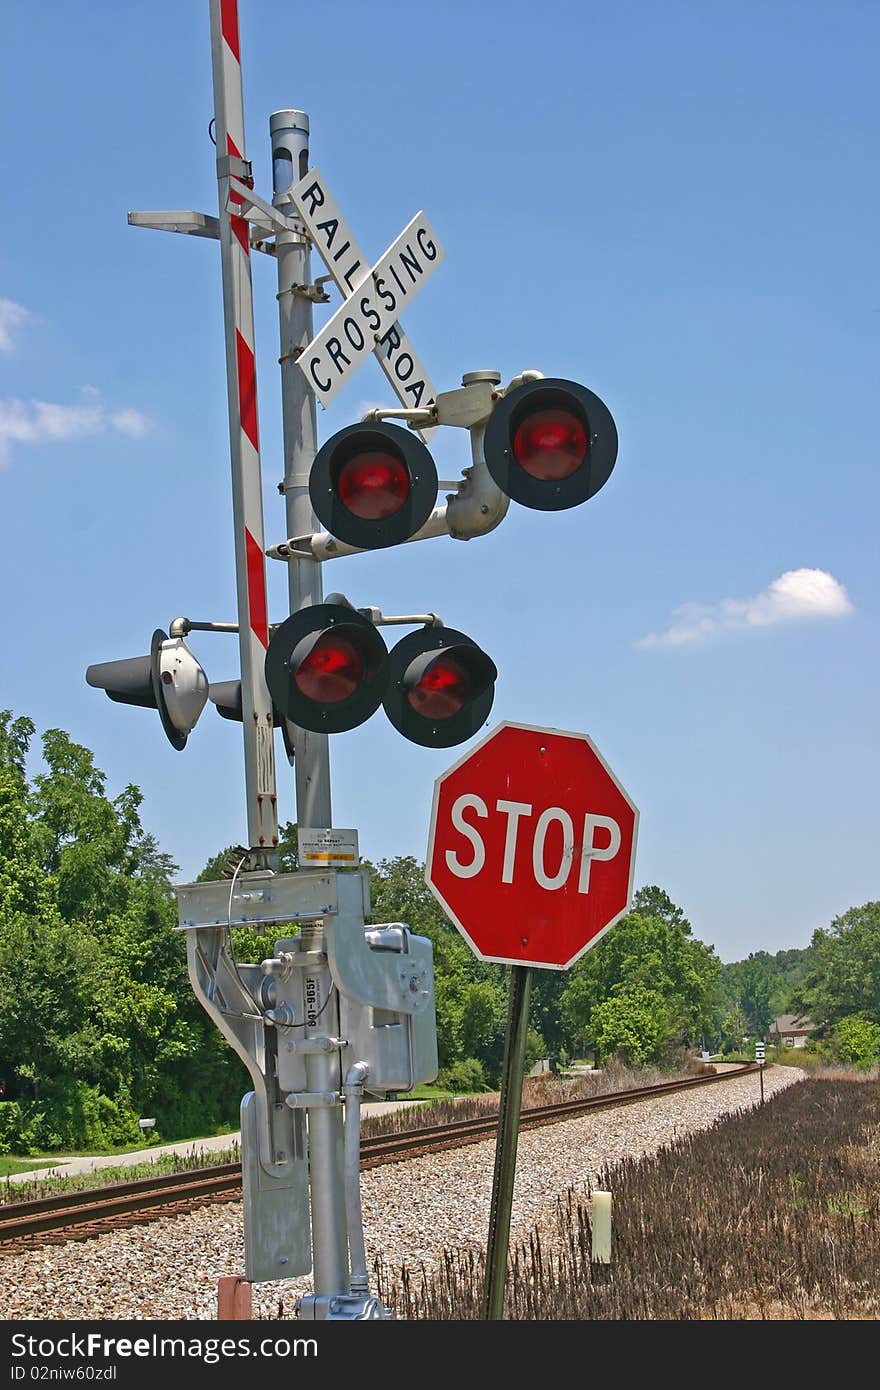 A railroad crossing gate and a stop sign near train tracks